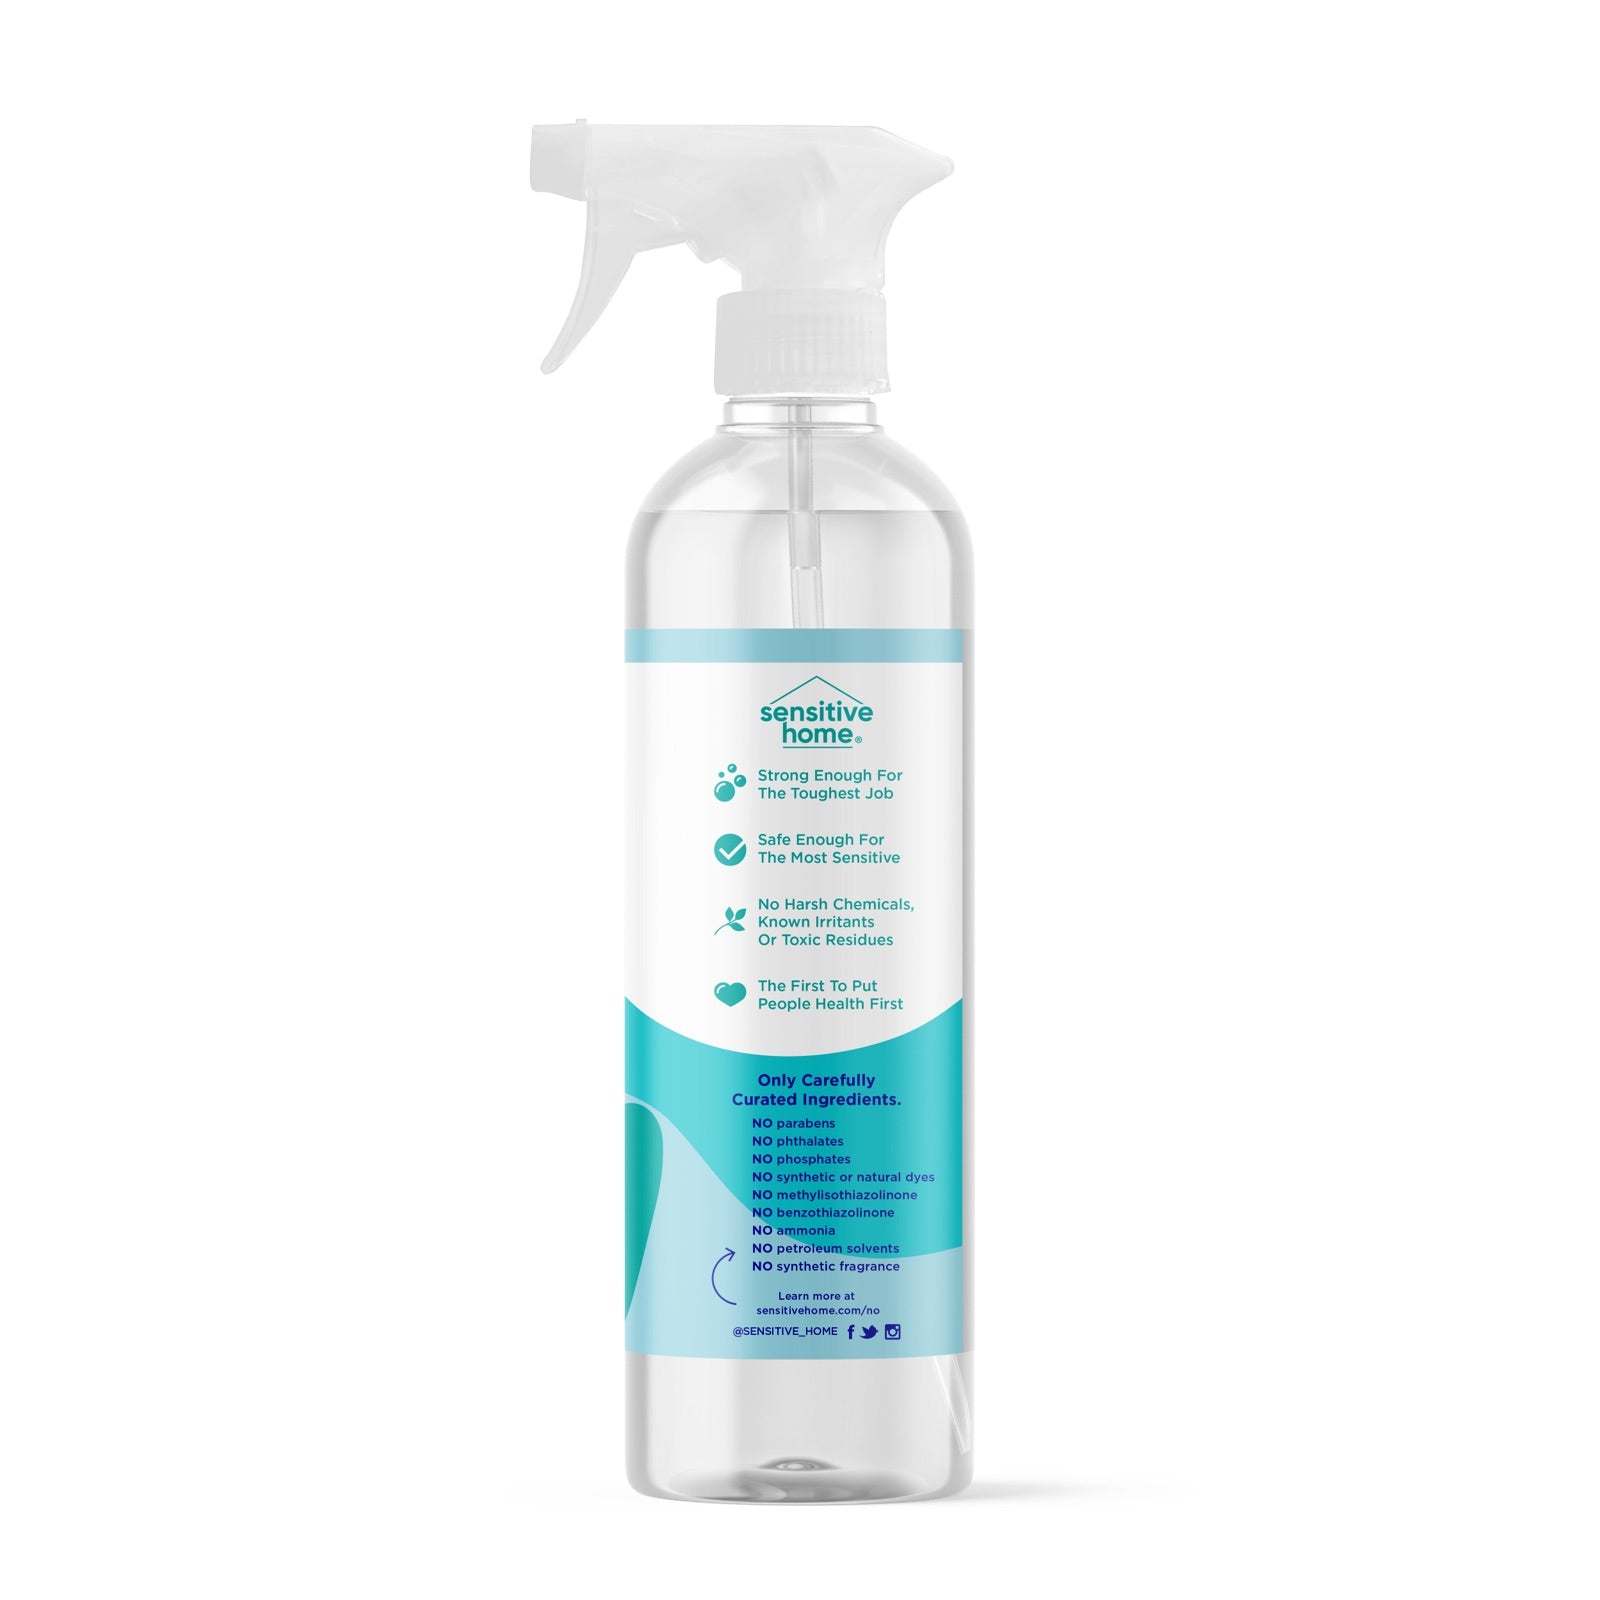 Get Sparkling Clean Showers - No Harsh Chemicals. Shop Now!